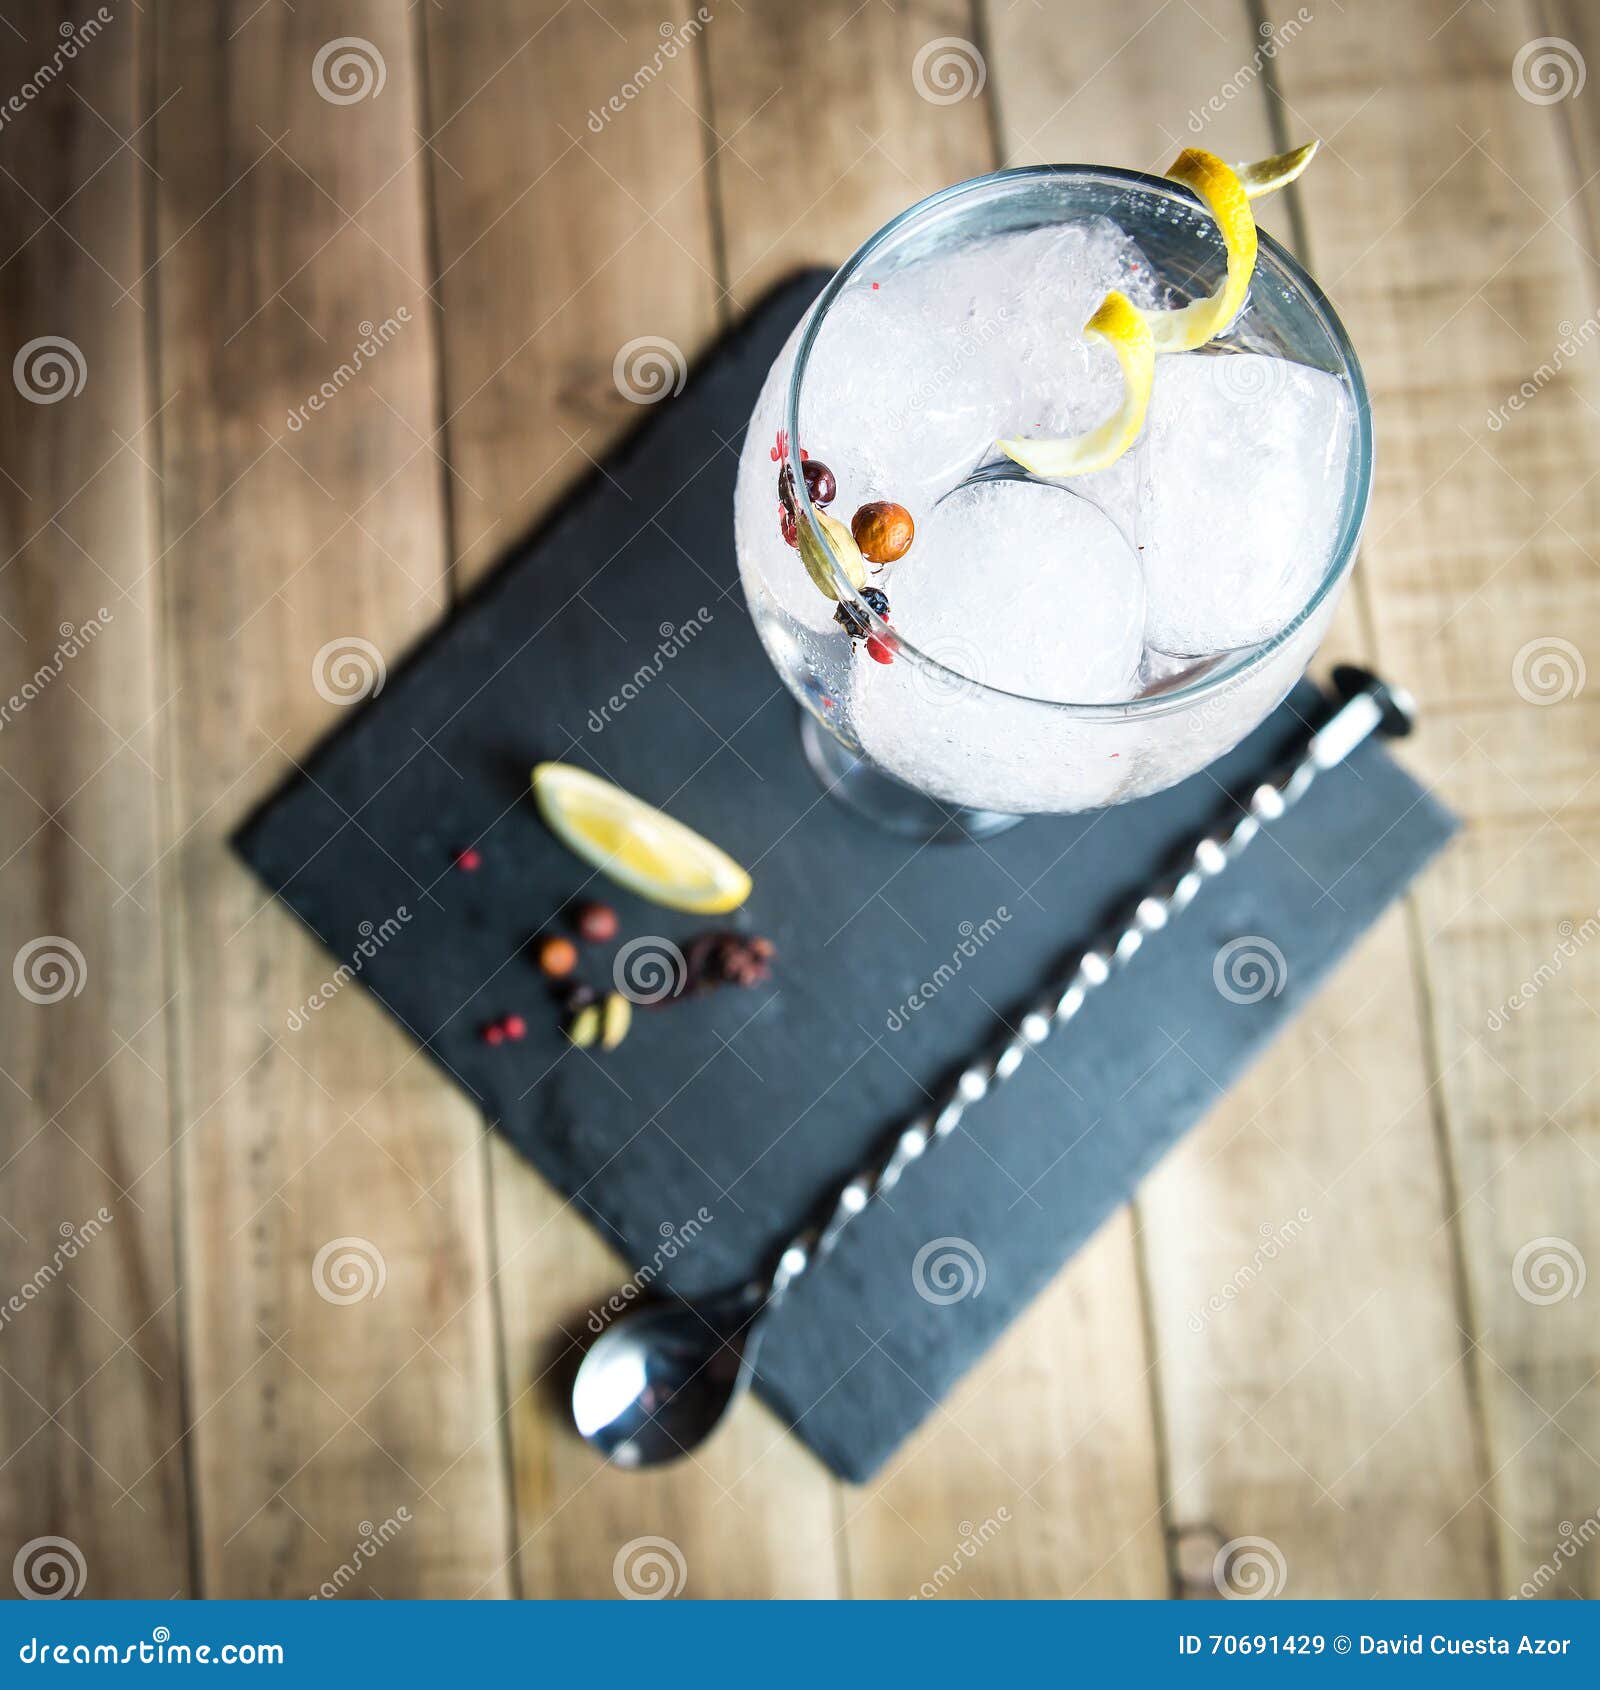 gin tonic with botanicals and bar spoon on wood table.